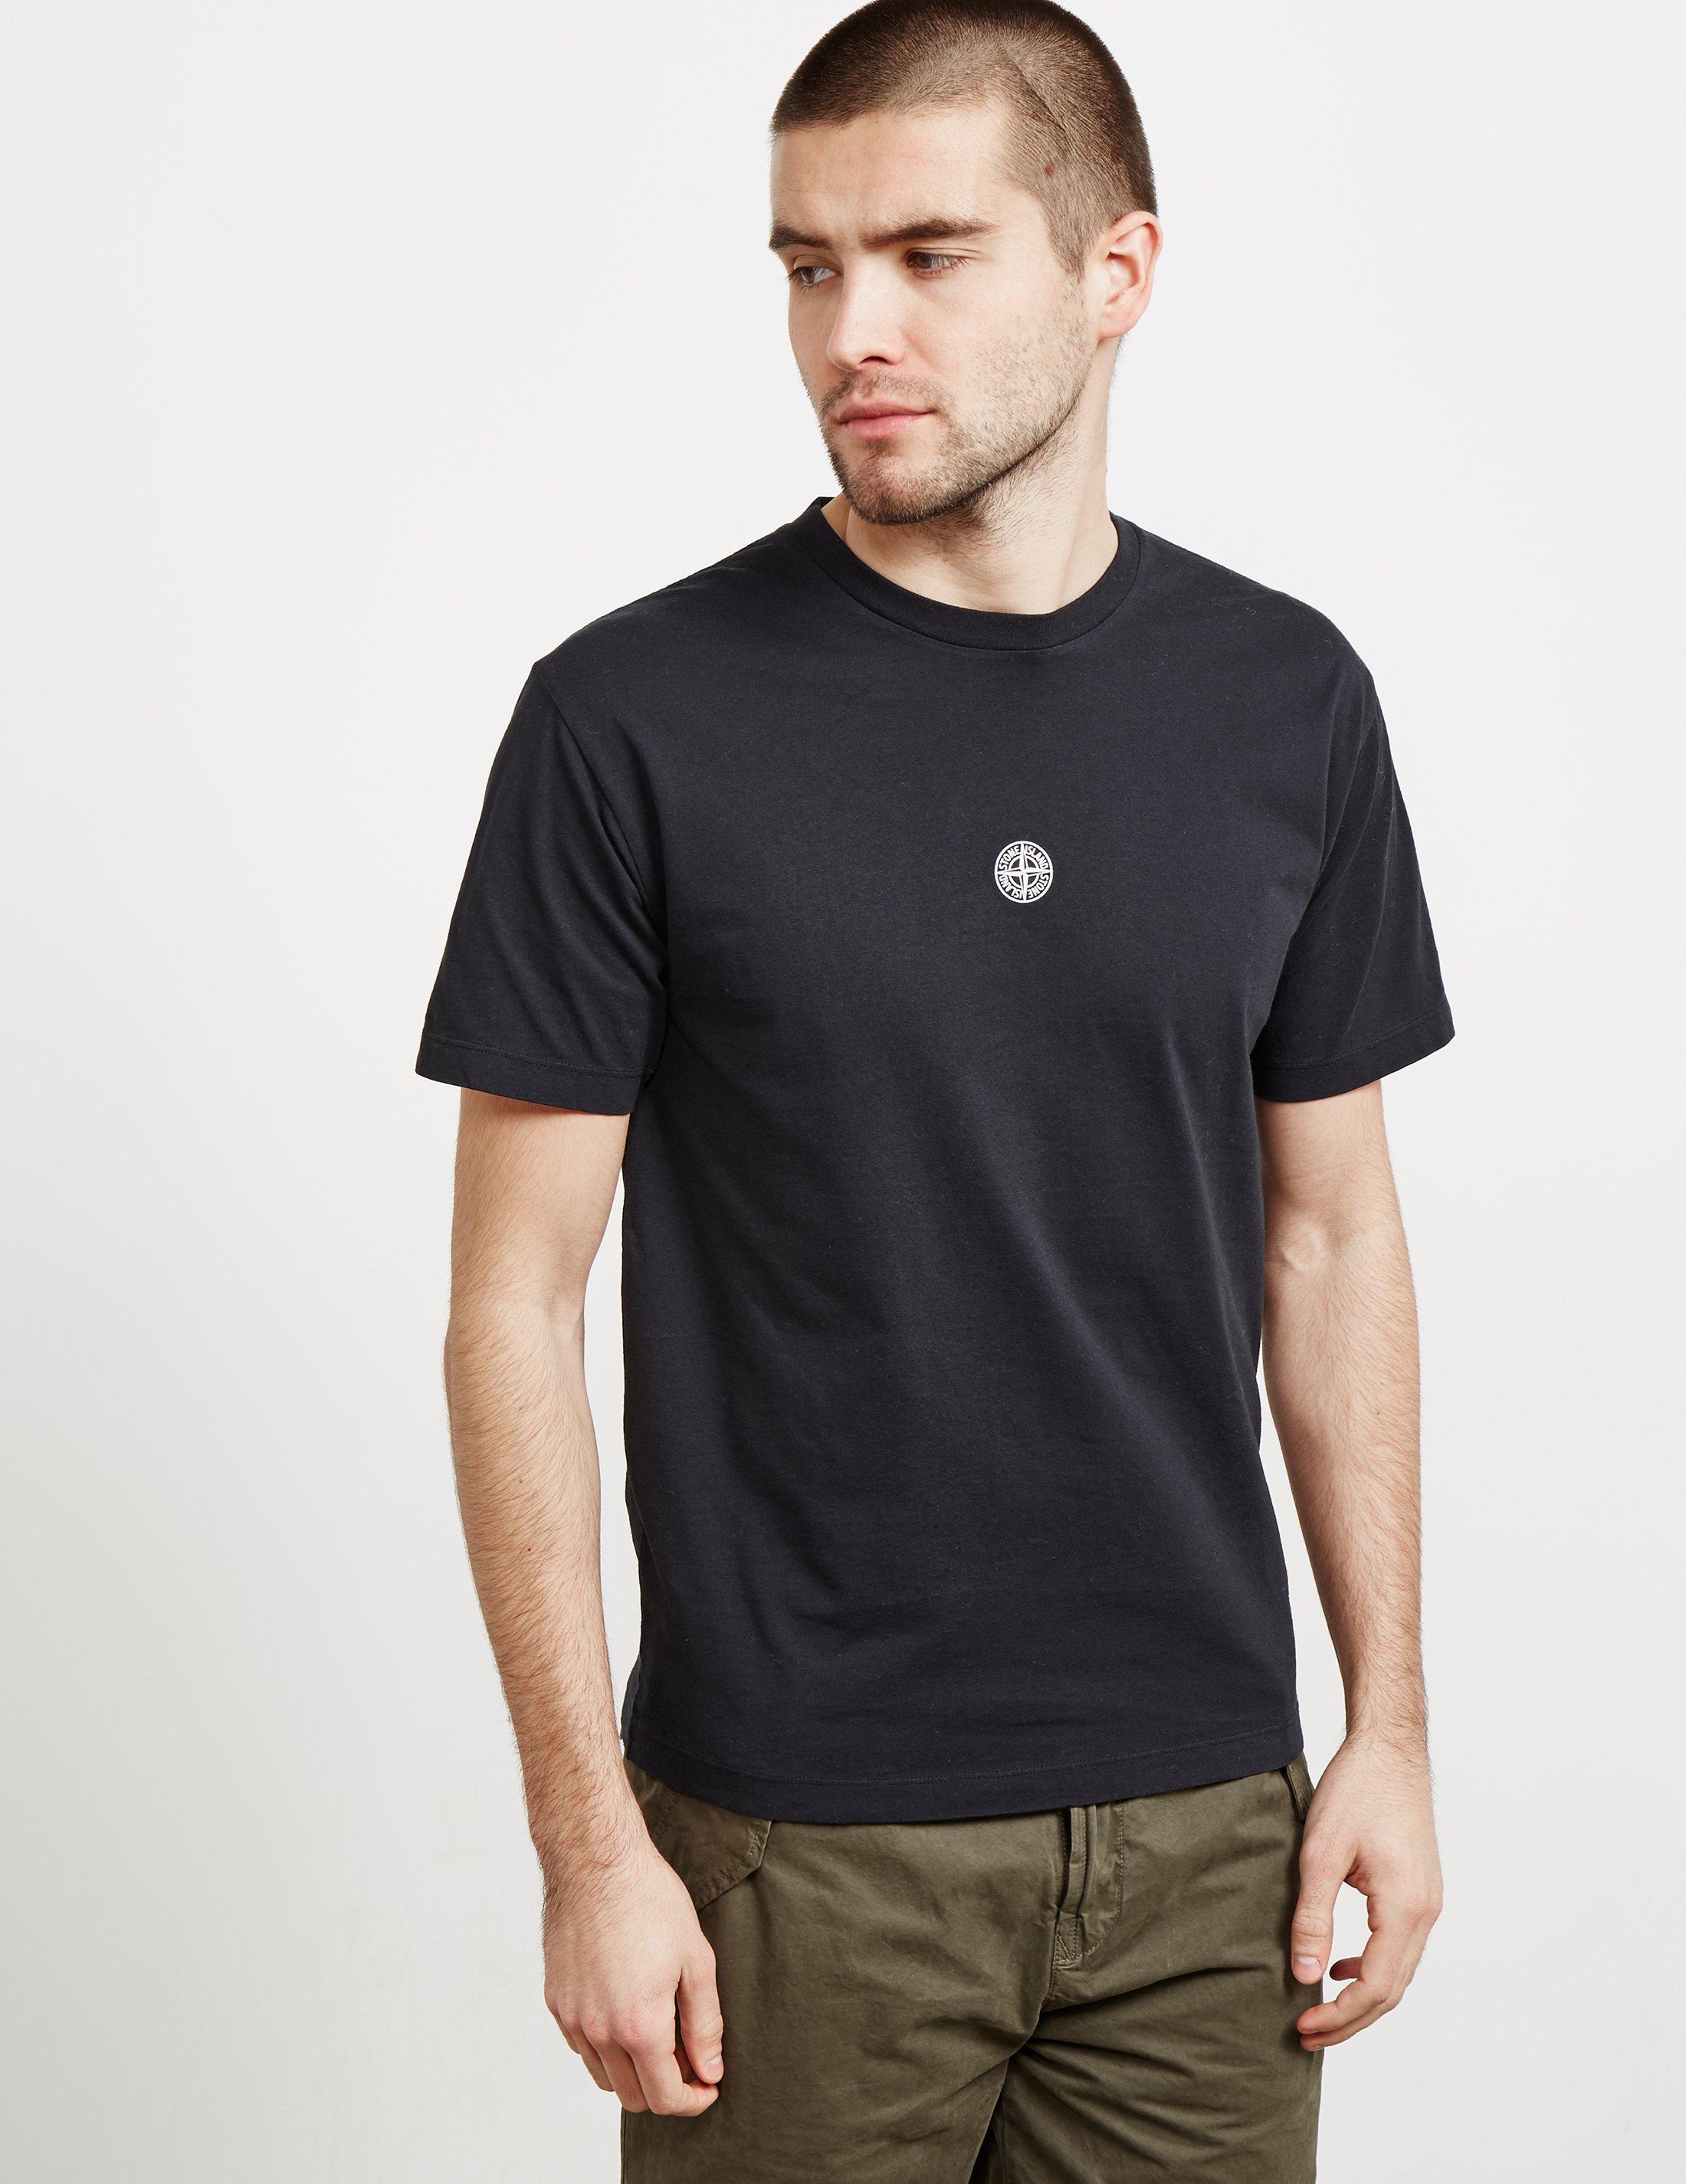 Stone Island Black Tee Store, SAVE 36% - aveclumiere.com